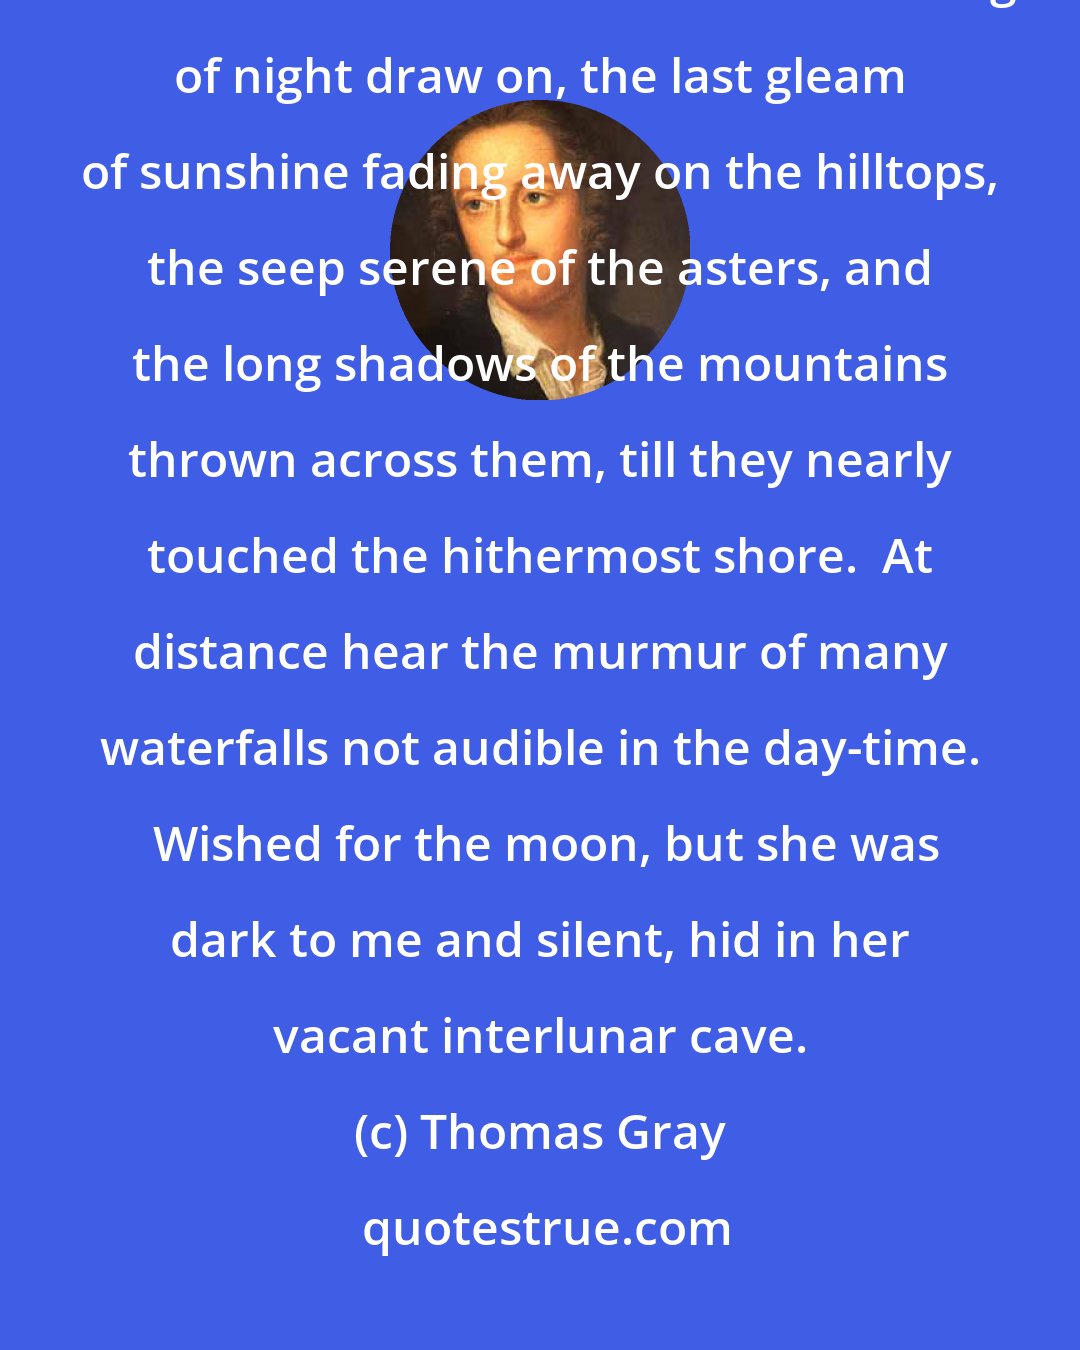 Thomas Gray: In the evening, I walked alone down to the Lake by the side of Crow Park after sunset and saw the solemn coloring of night draw on, the last gleam of sunshine fading away on the hilltops, the seep serene of the asters, and the long shadows of the mountains thrown across them, till they nearly touched the hithermost shore.  At distance hear the murmur of many waterfalls not audible in the day-time.  Wished for the moon, but she was dark to me and silent, hid in her vacant interlunar cave.